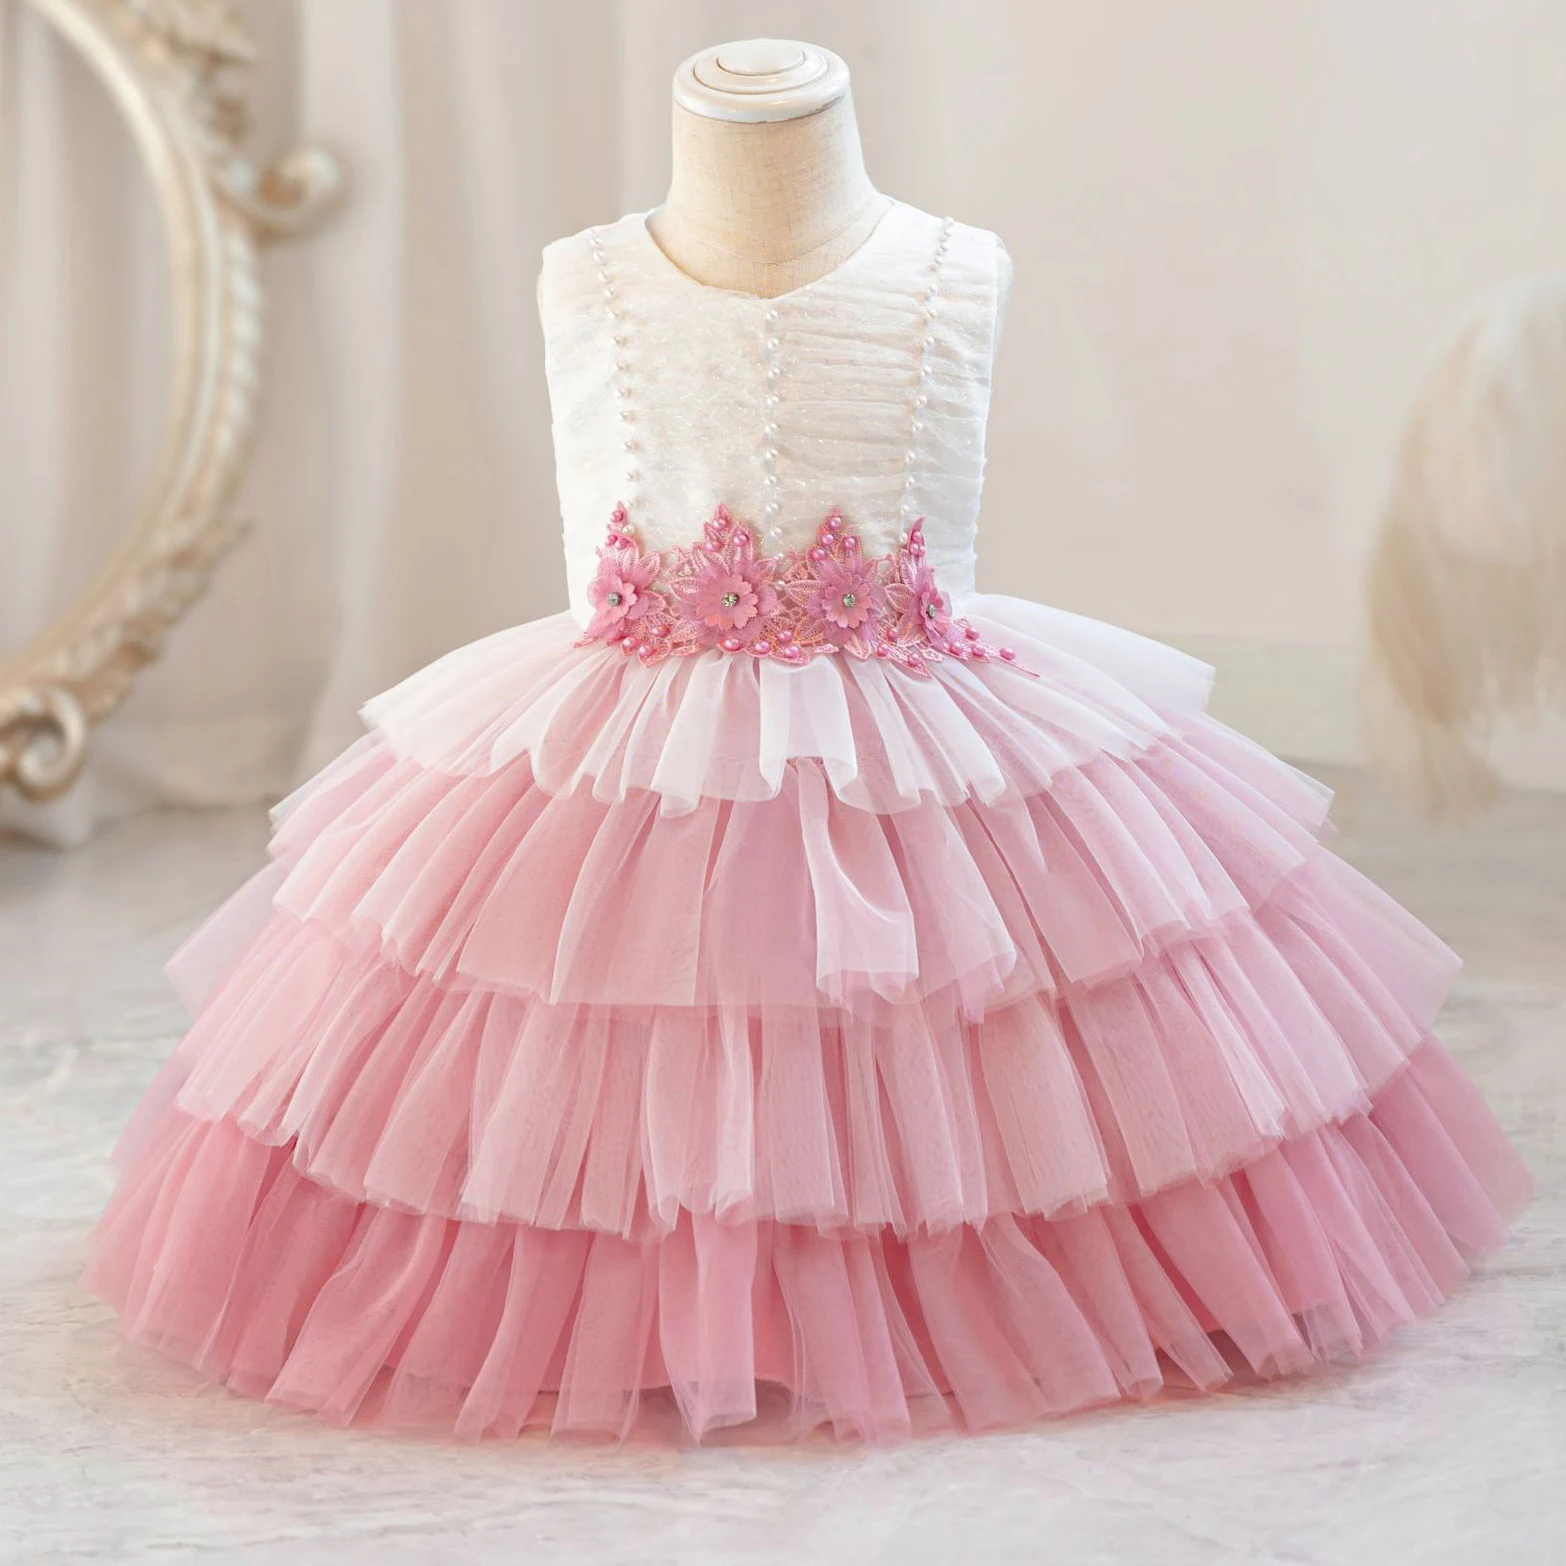 

Shiny Toddler Baby Little Girls Beaded Layered Ruffled Cupcake Tutu Dress Birthday Party Formal Pageant Dress AX173